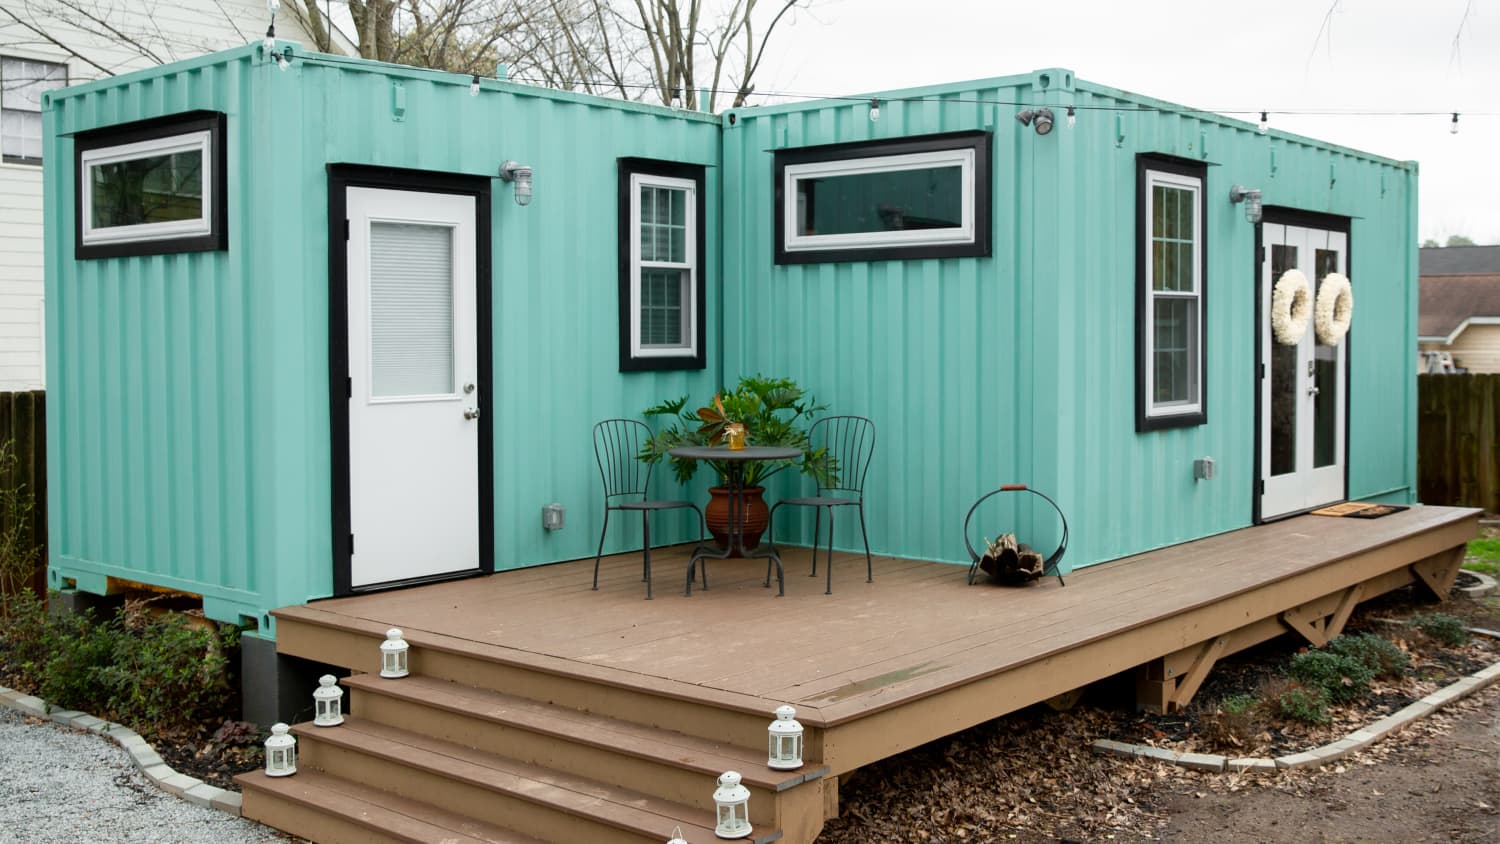 Alternative Living Spaces Converts Shipping Containers Into Tiny Homes for  $98,500